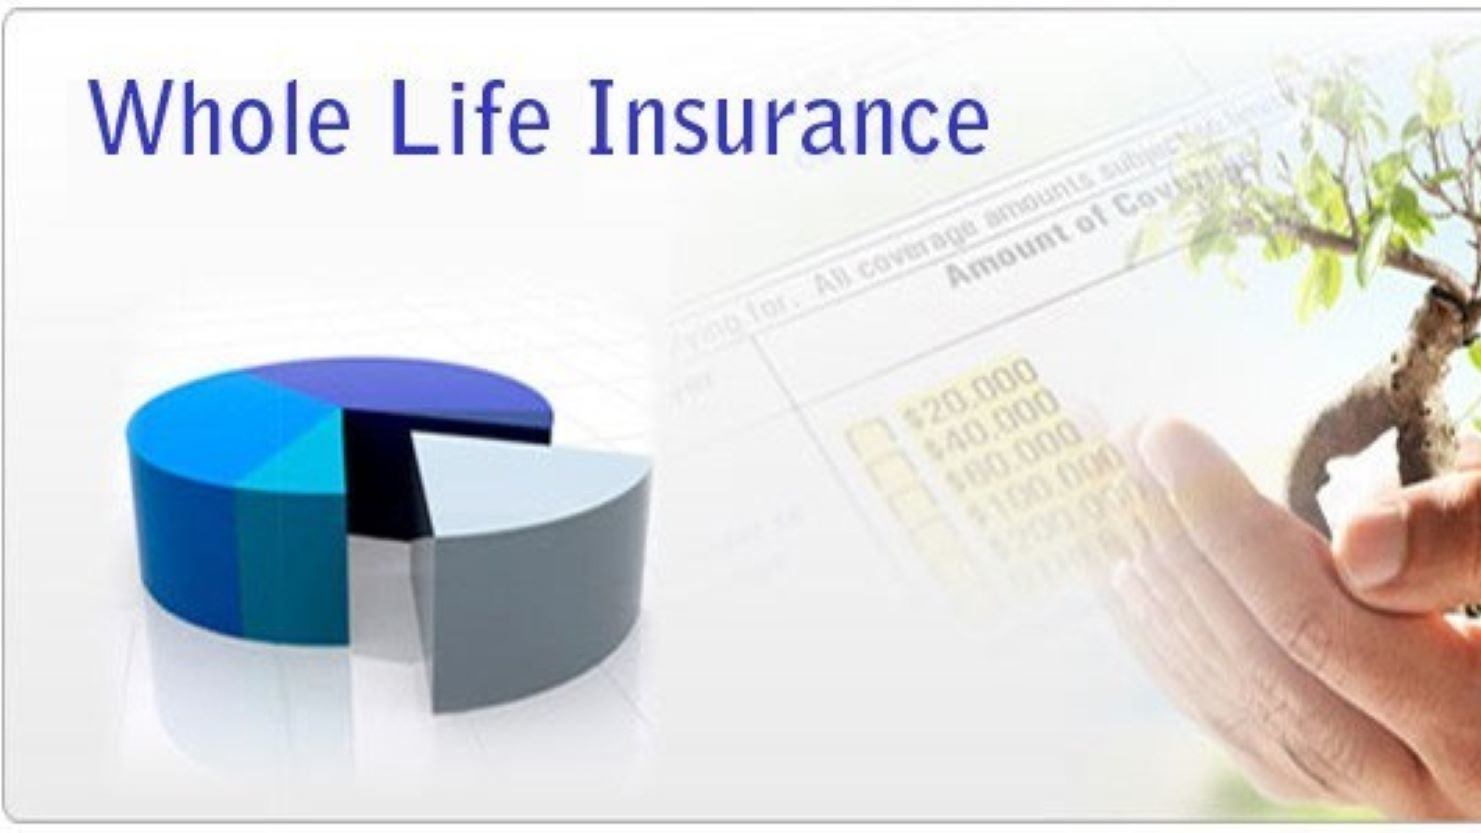 Term Life Insurance - The Complete Definitive Guide EDC